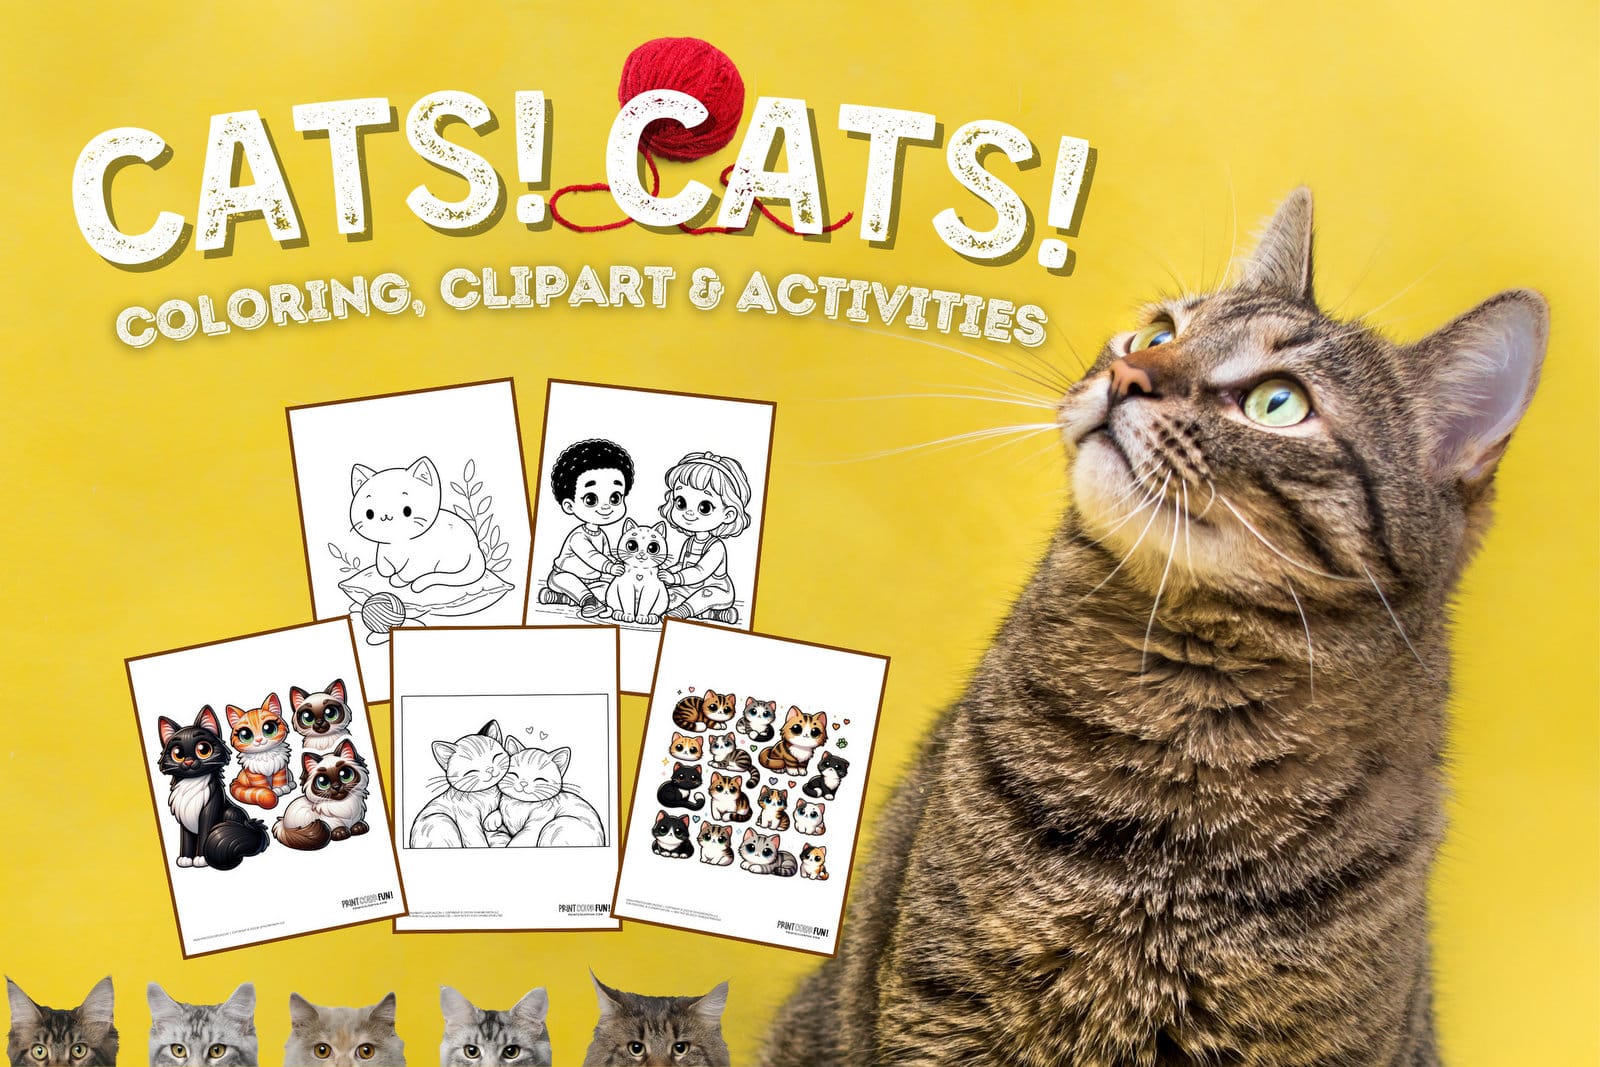 Cats coloring page clipart activities from PrintColorFun com